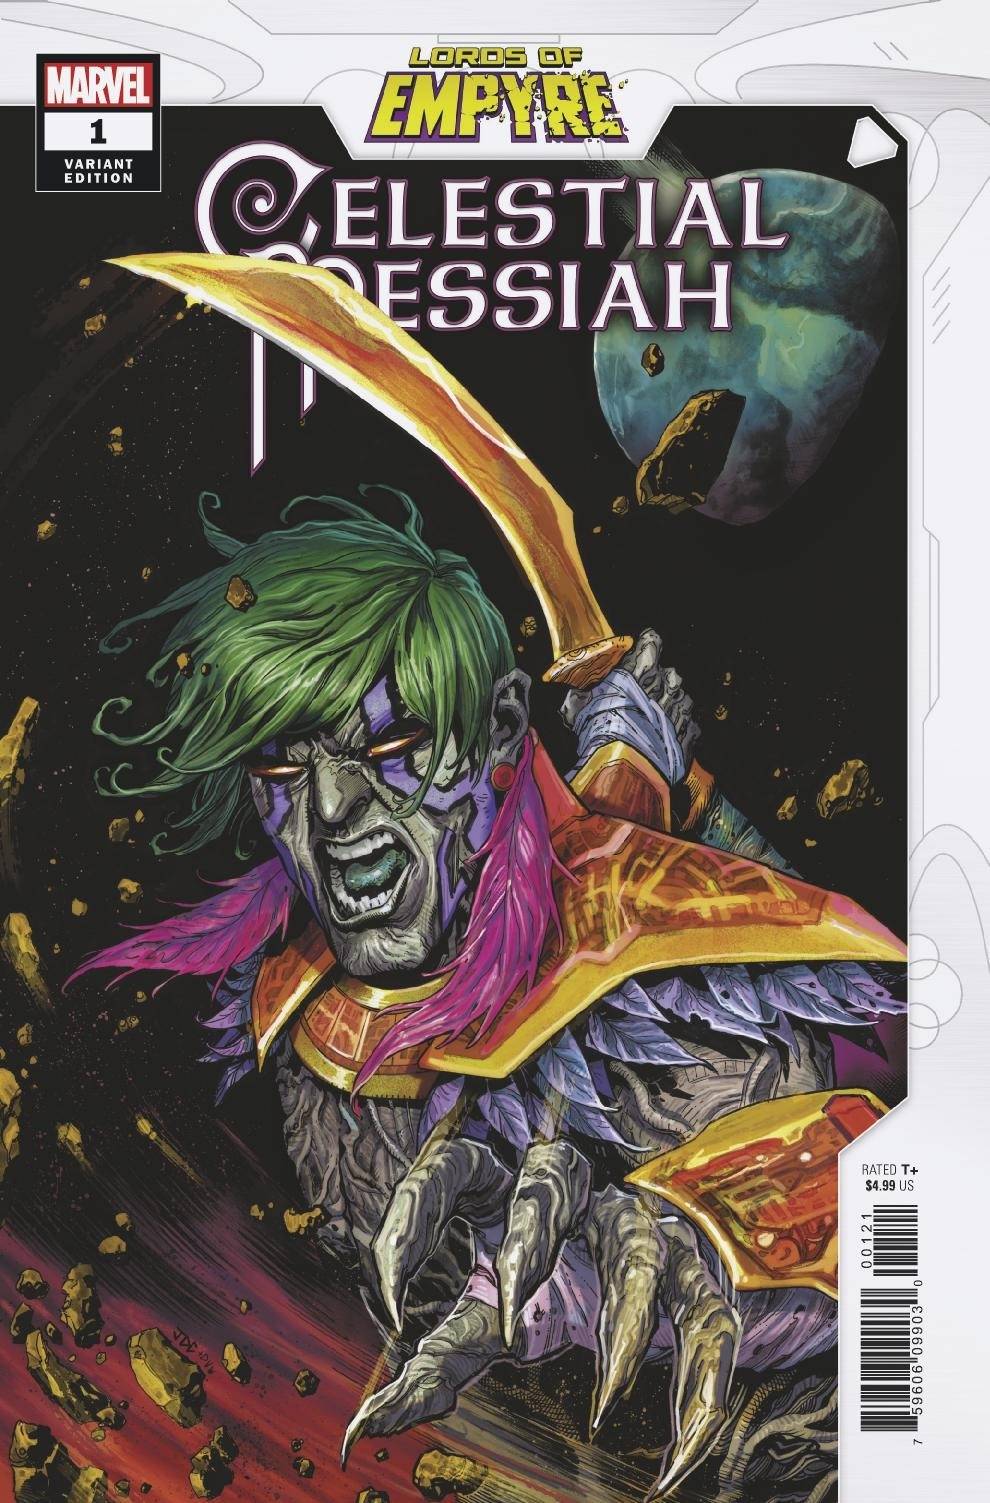 Lords of Empyre Celestial Messiah #1 Cassara Variant